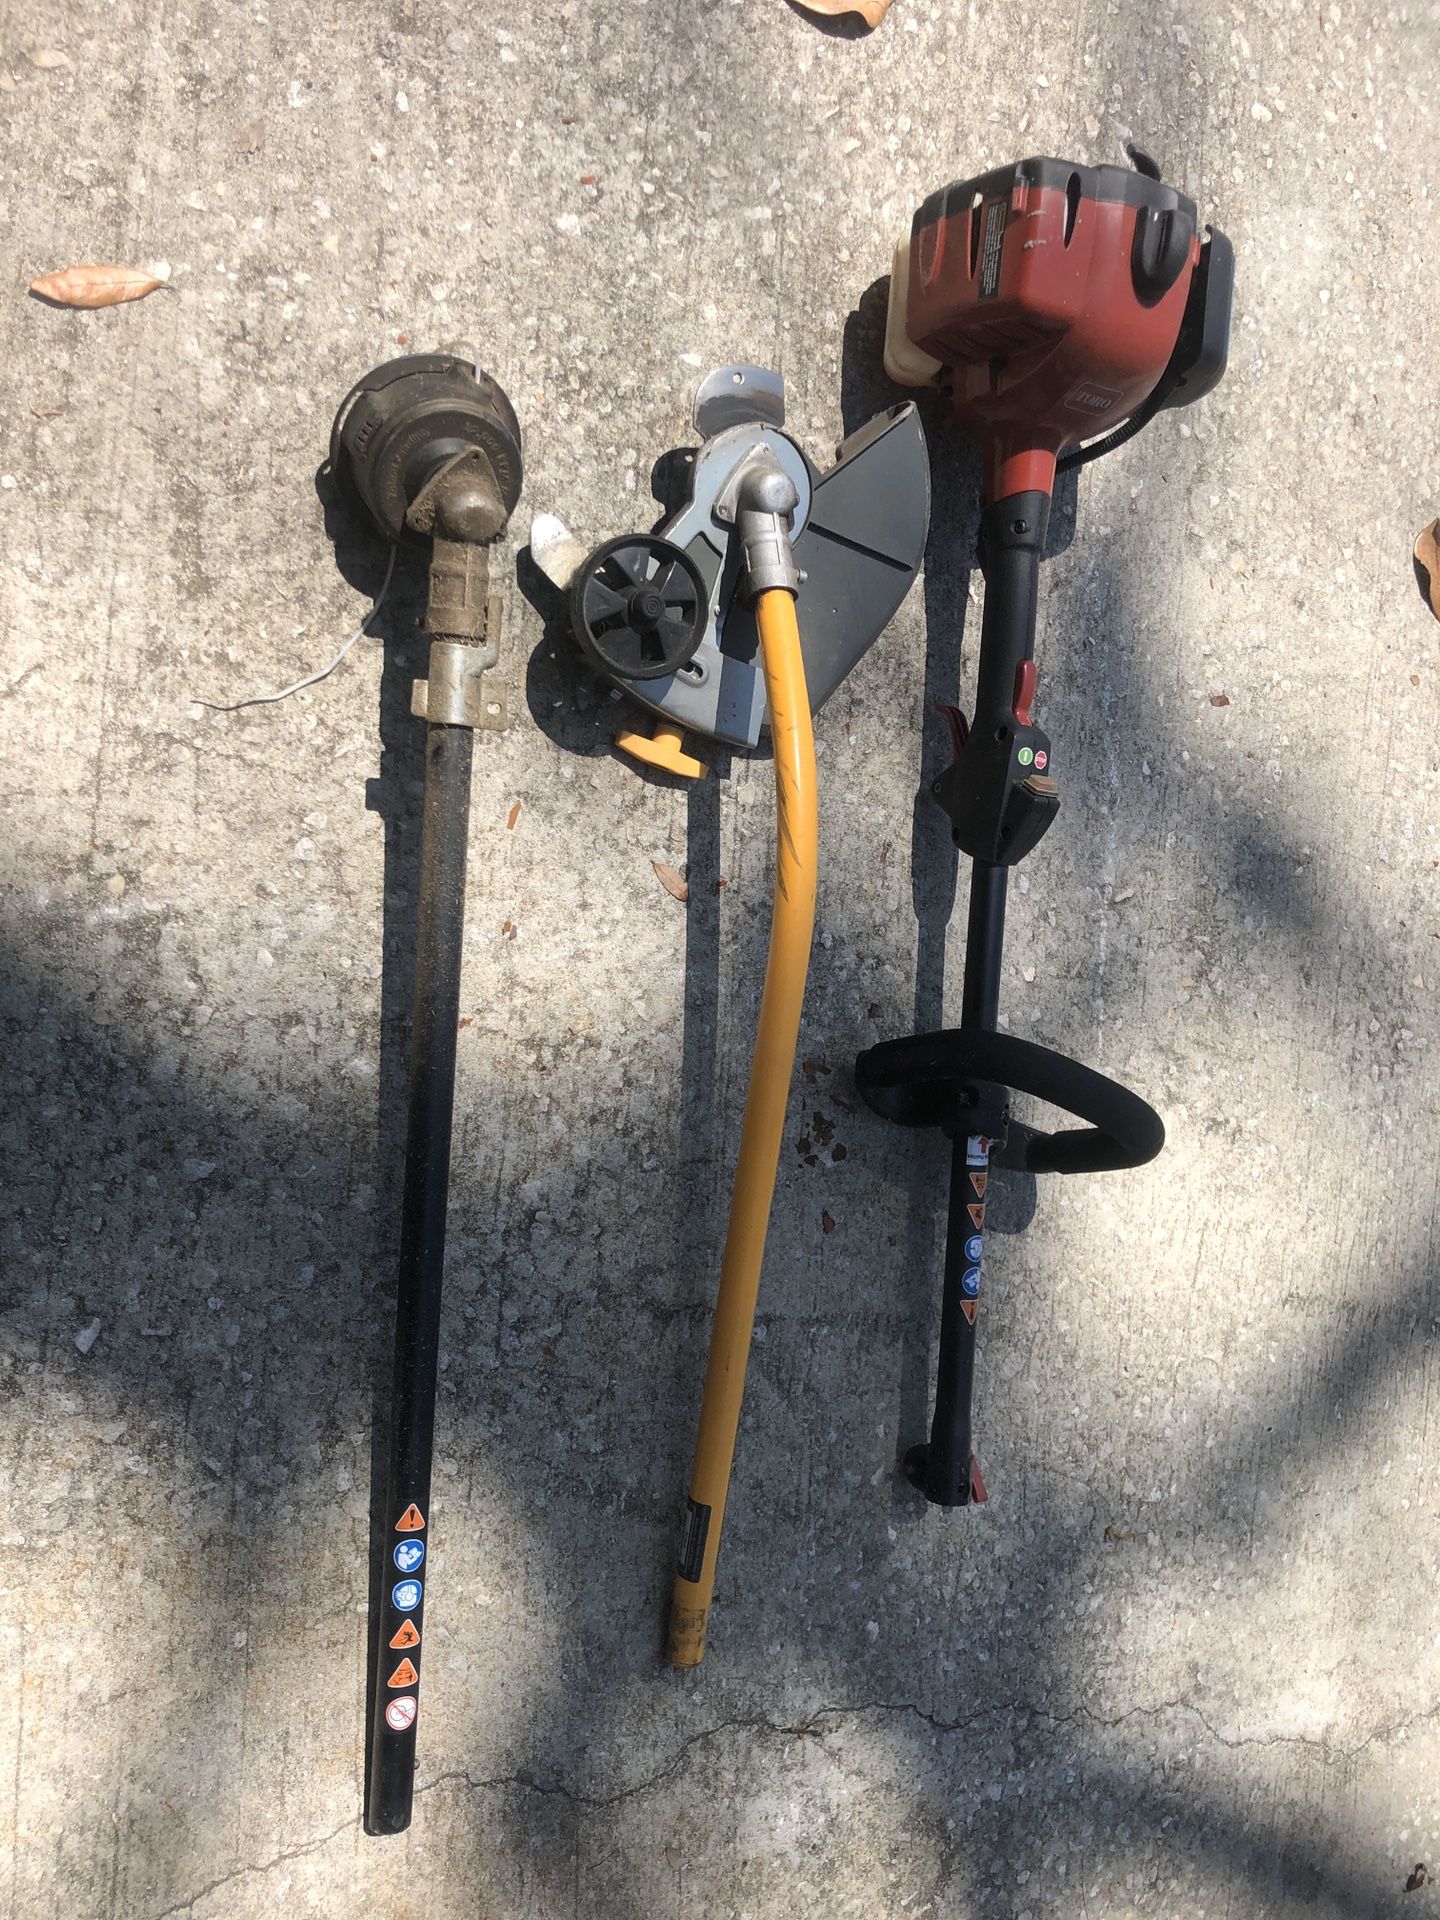 $40 firm - Edger and weed walker combo